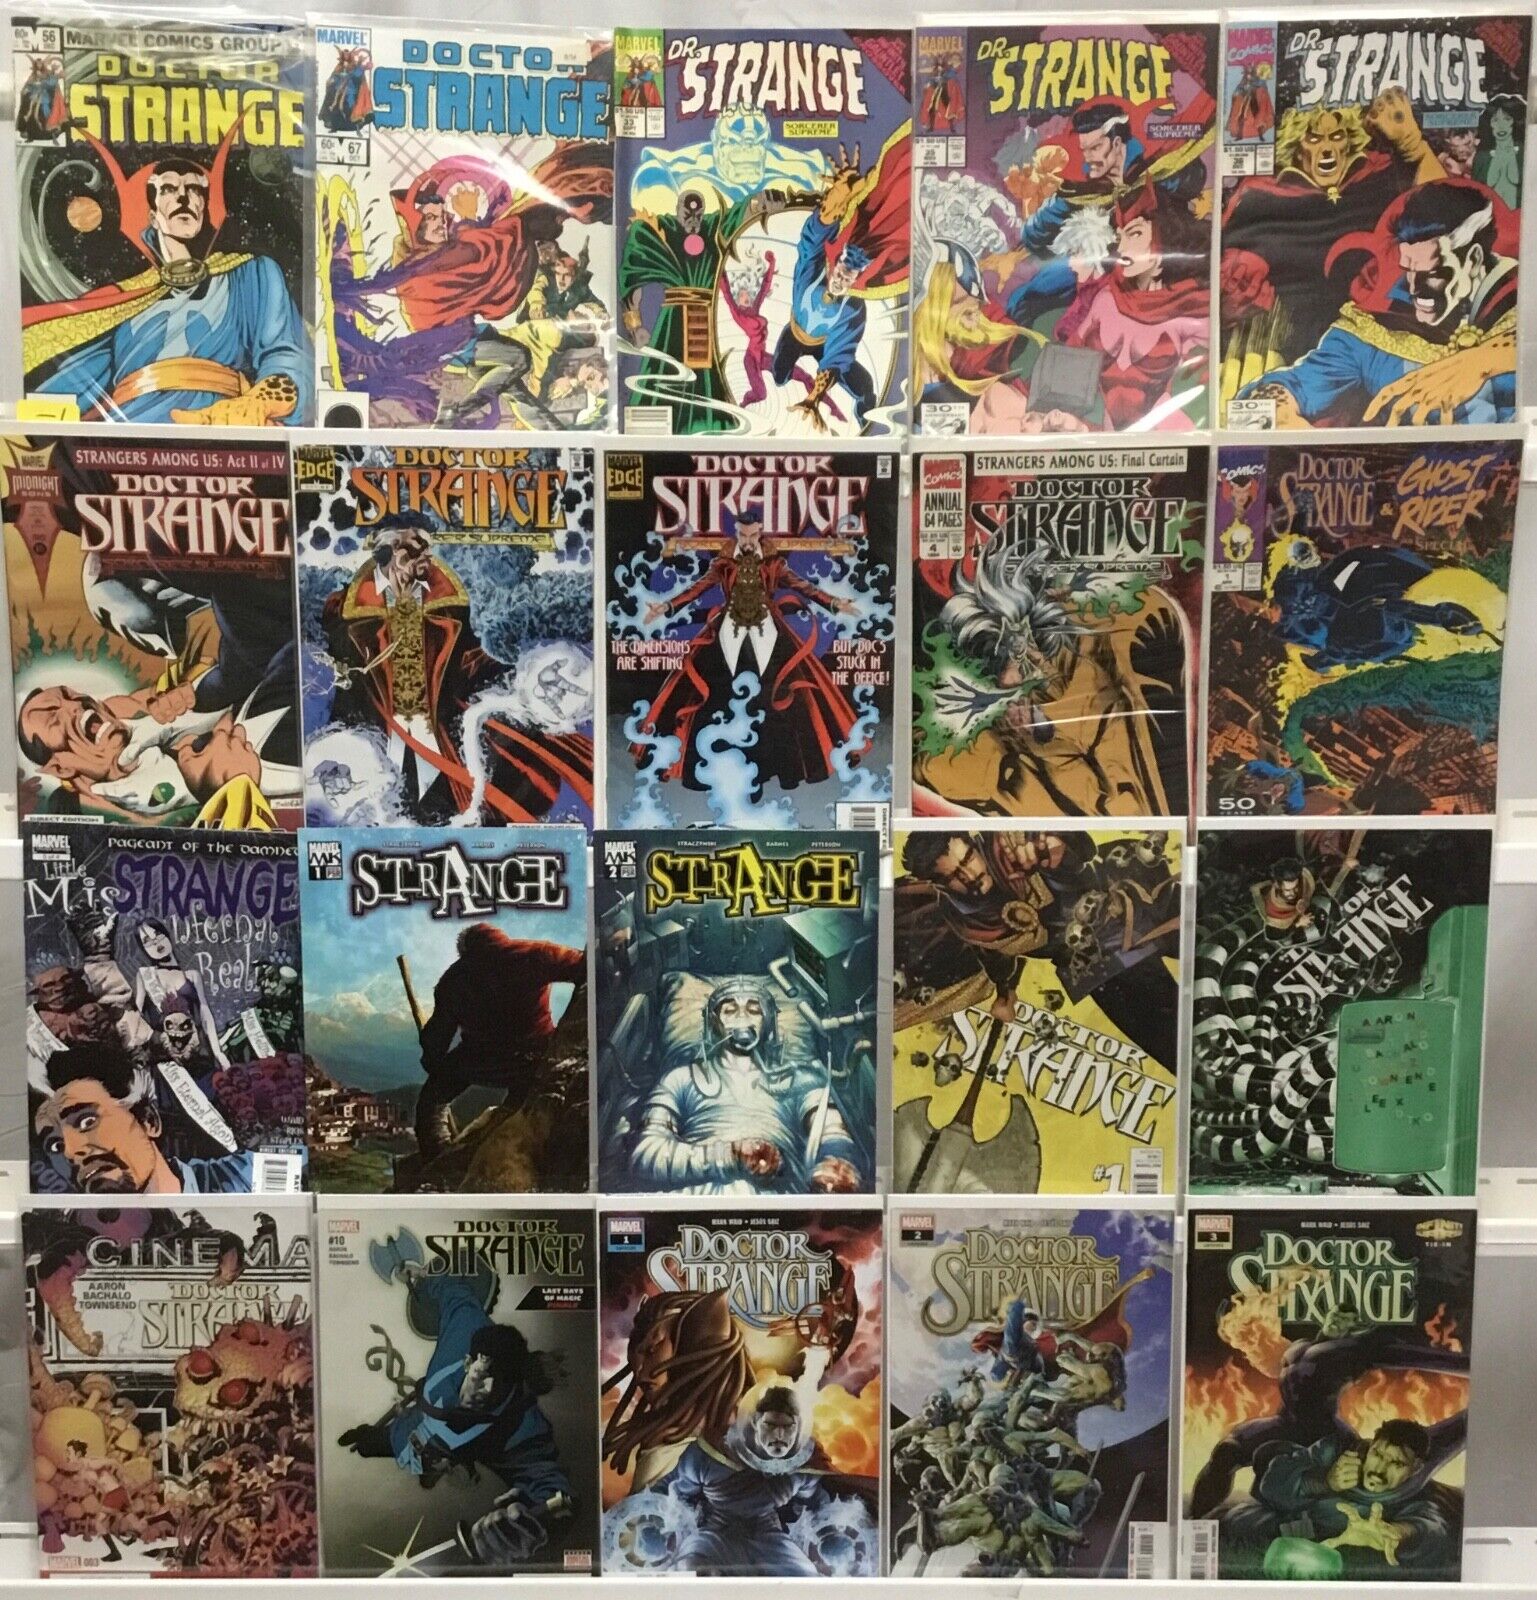 Marvel Comics Doctor Strange Comic Book Lot of 20 Issues - Ghost Rider, Knights